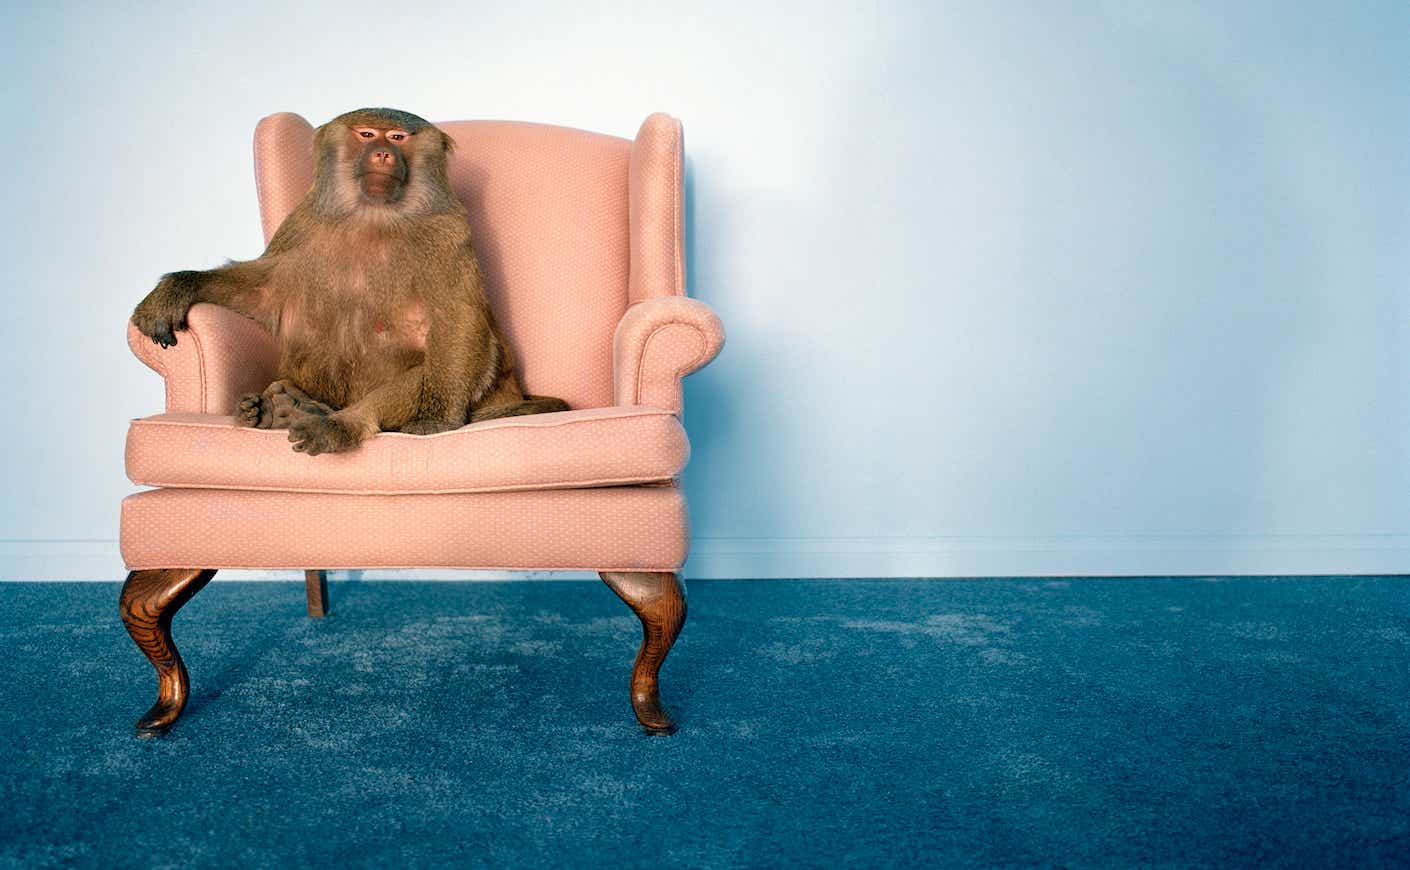 monkey sitting in a chair